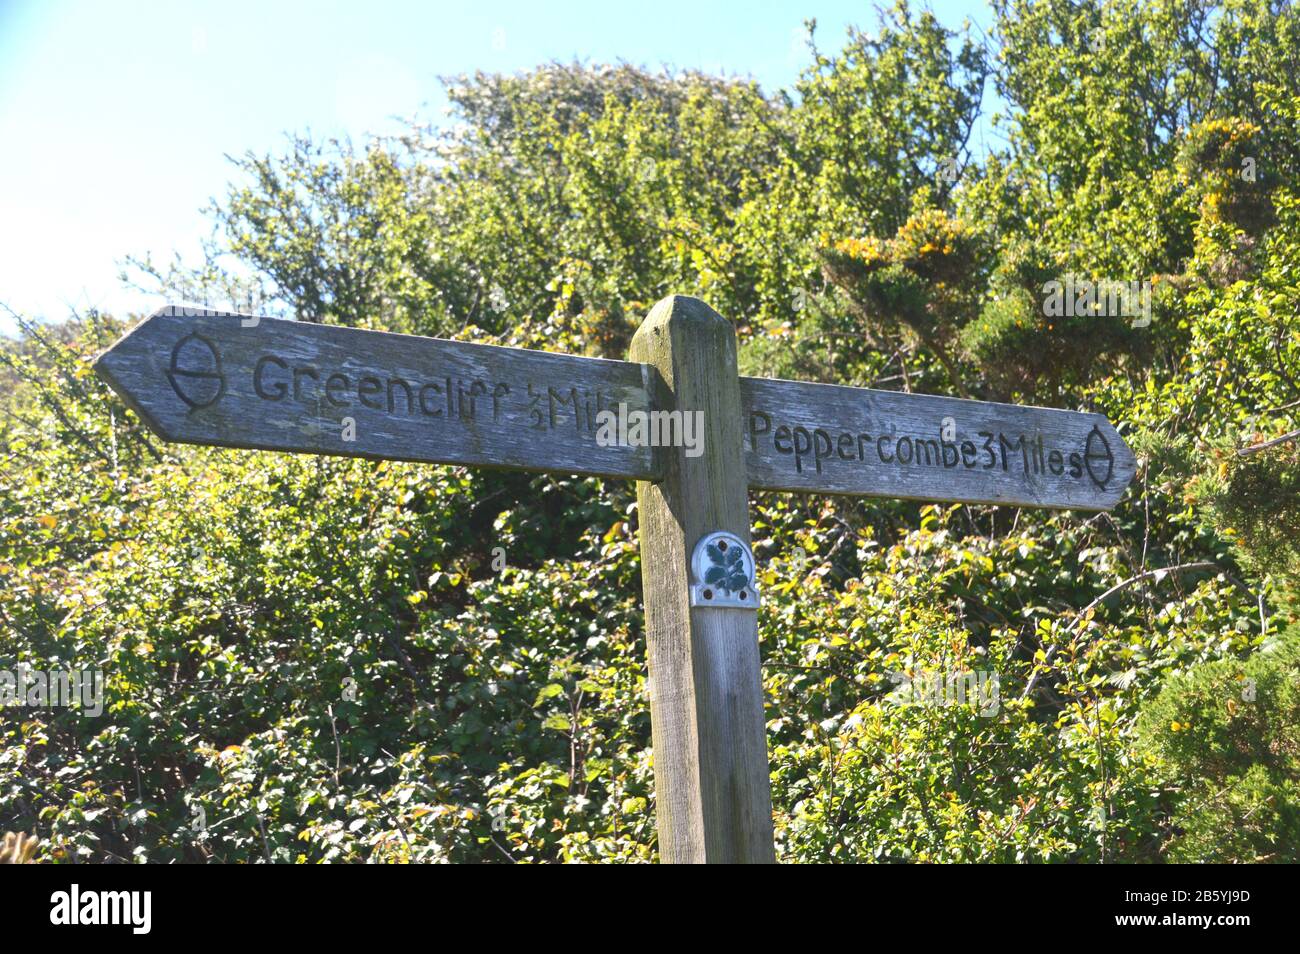 National Trust Signpost for Greencliff & Peppercombe between Westward Ho! and Buck's Mills on the South West Coast Path, North Devon. England, UK. Stock Photo